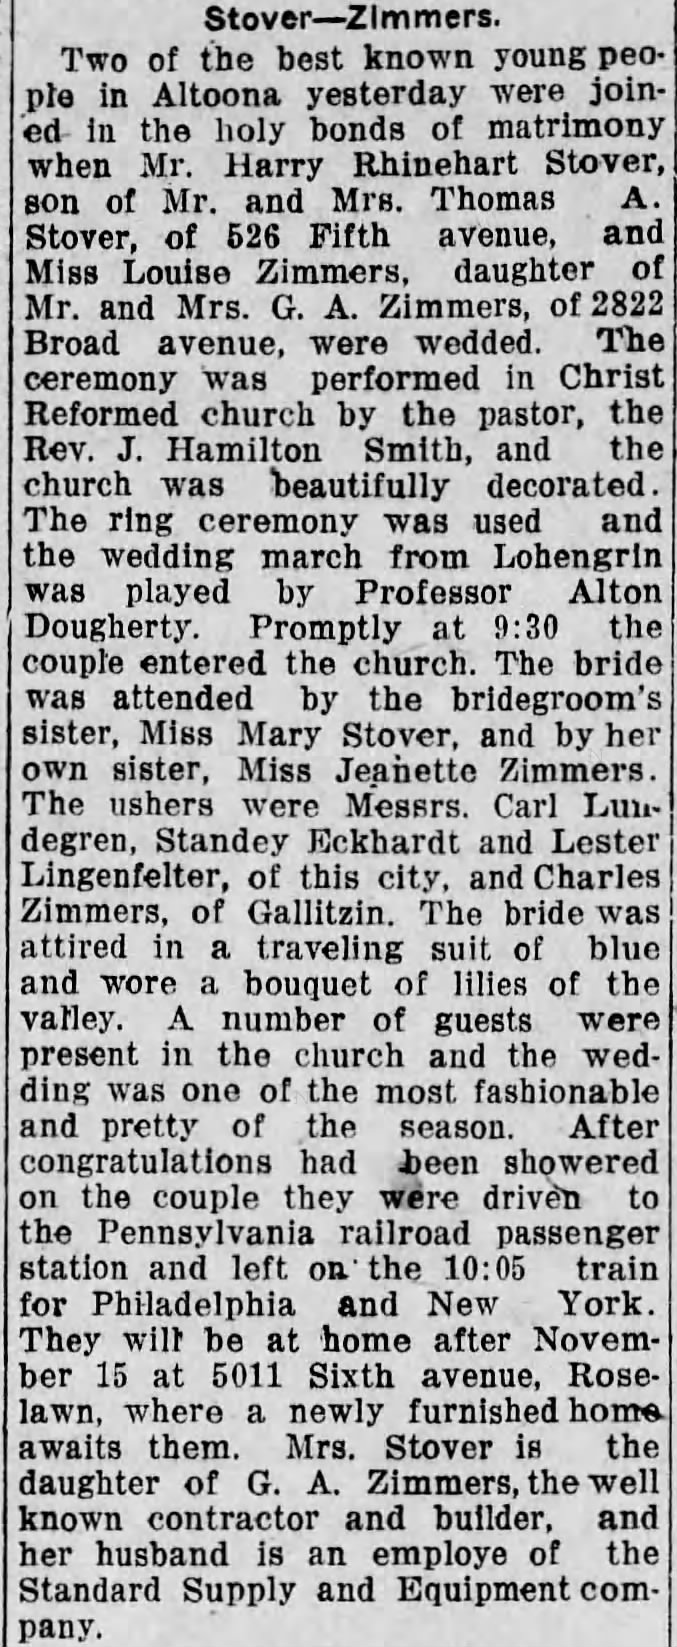 Harry Rhinehart Stover & Louise Zimmers wed